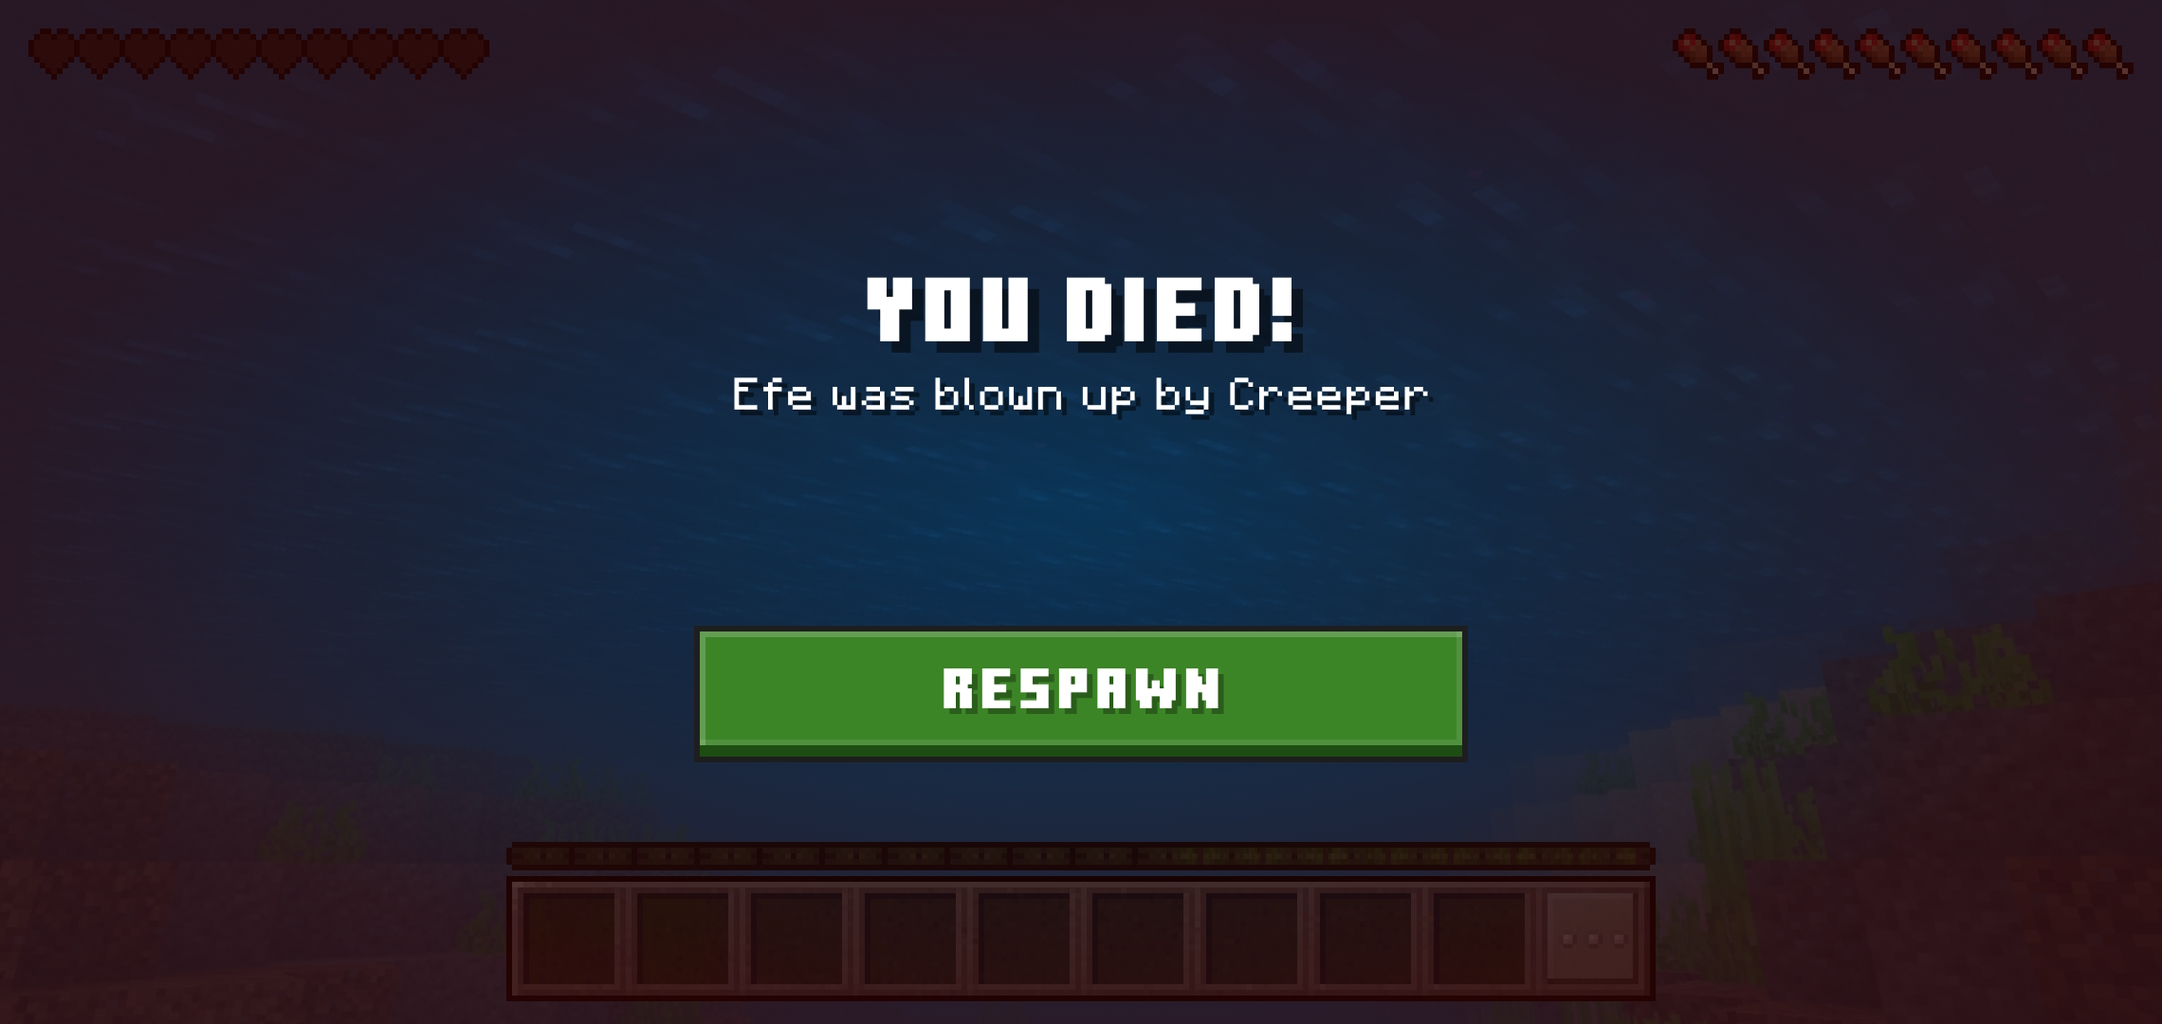 Mobile version of the “You died” screen